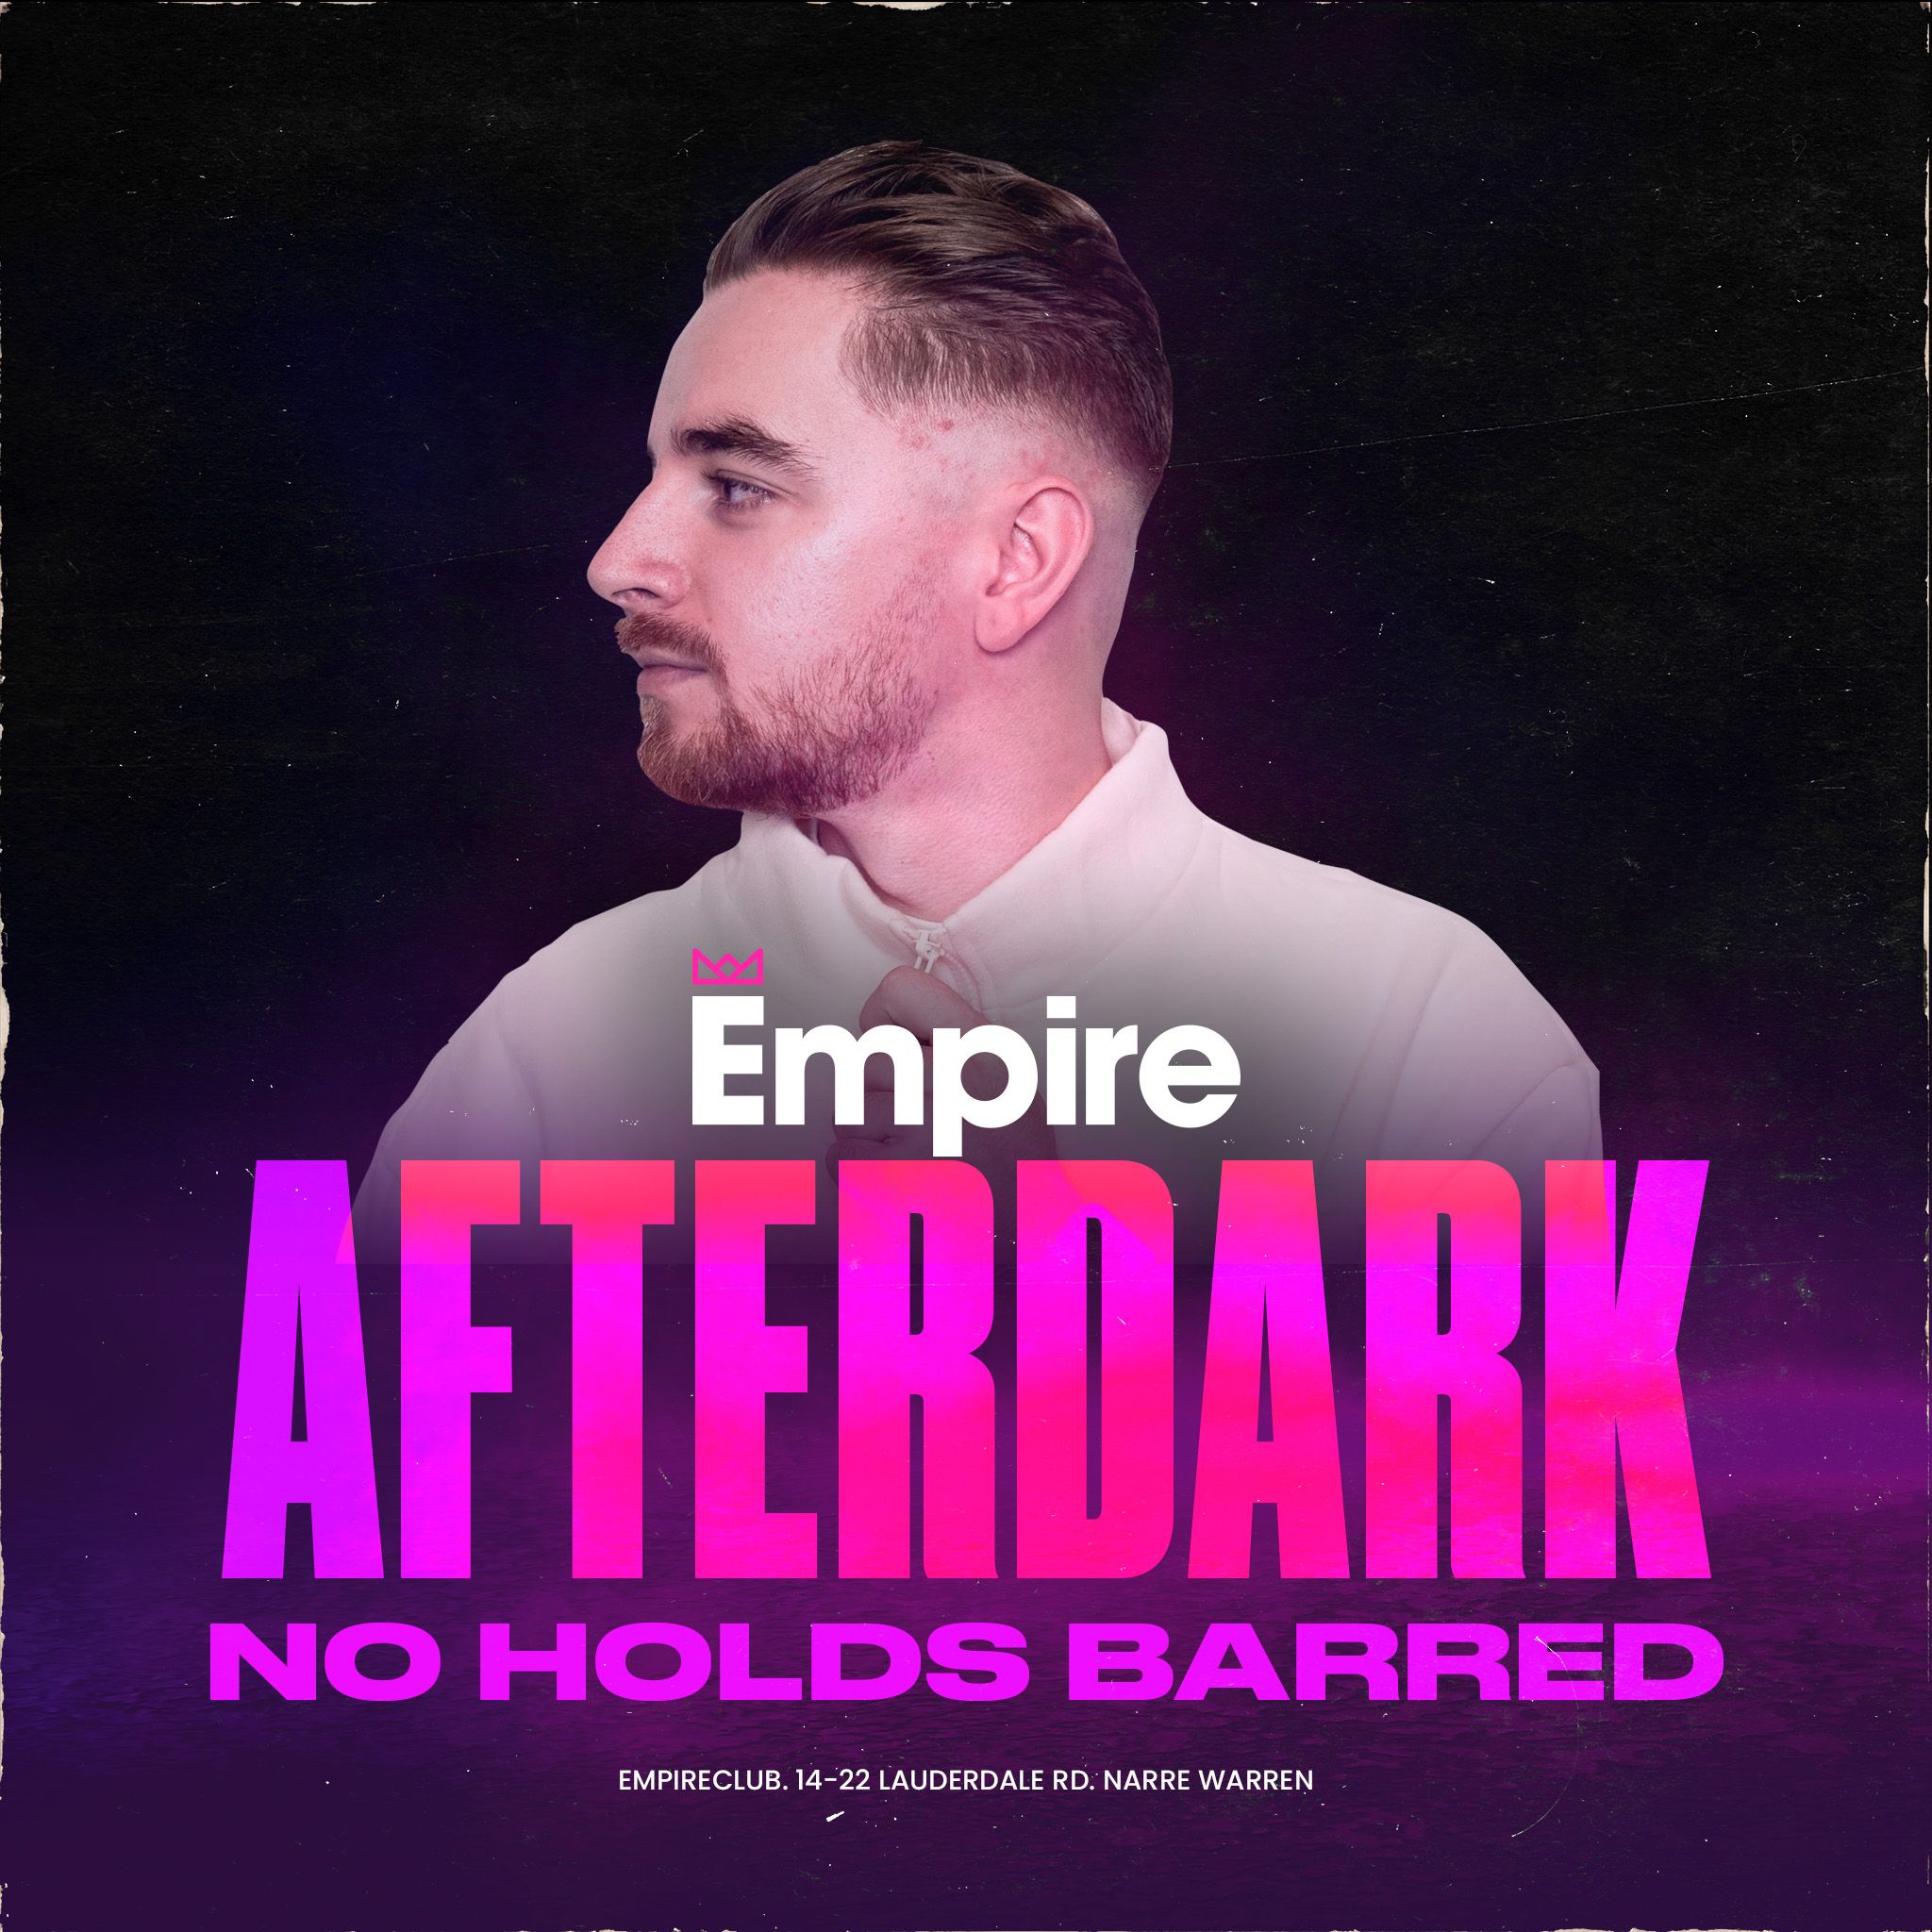 Hent Empire Afterdark Ft. No Holds Barred